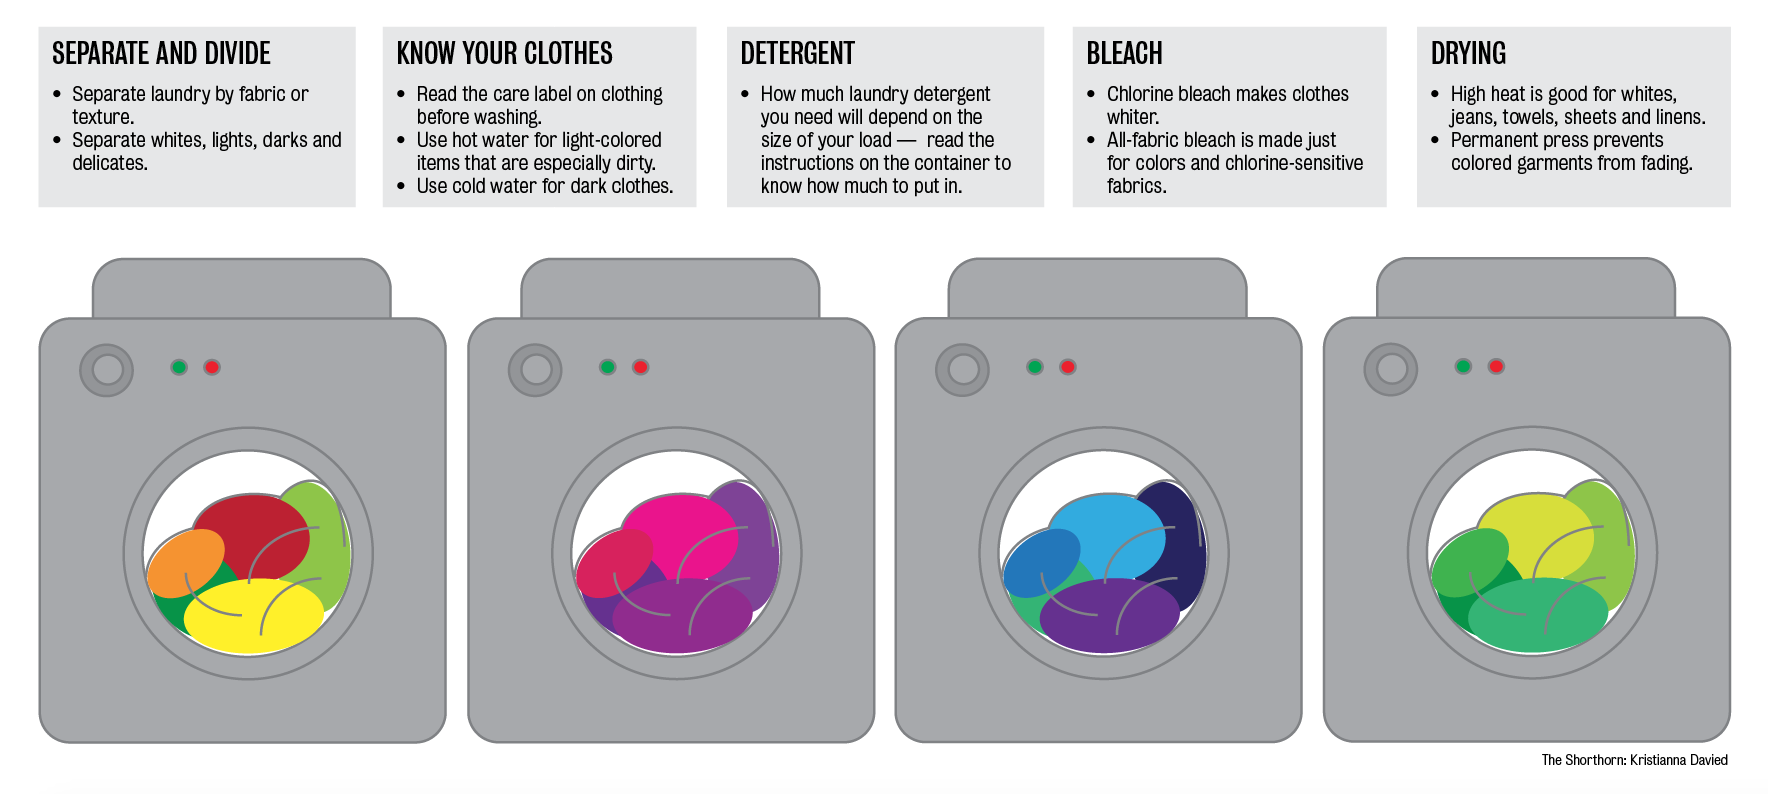 how do you separate laundry